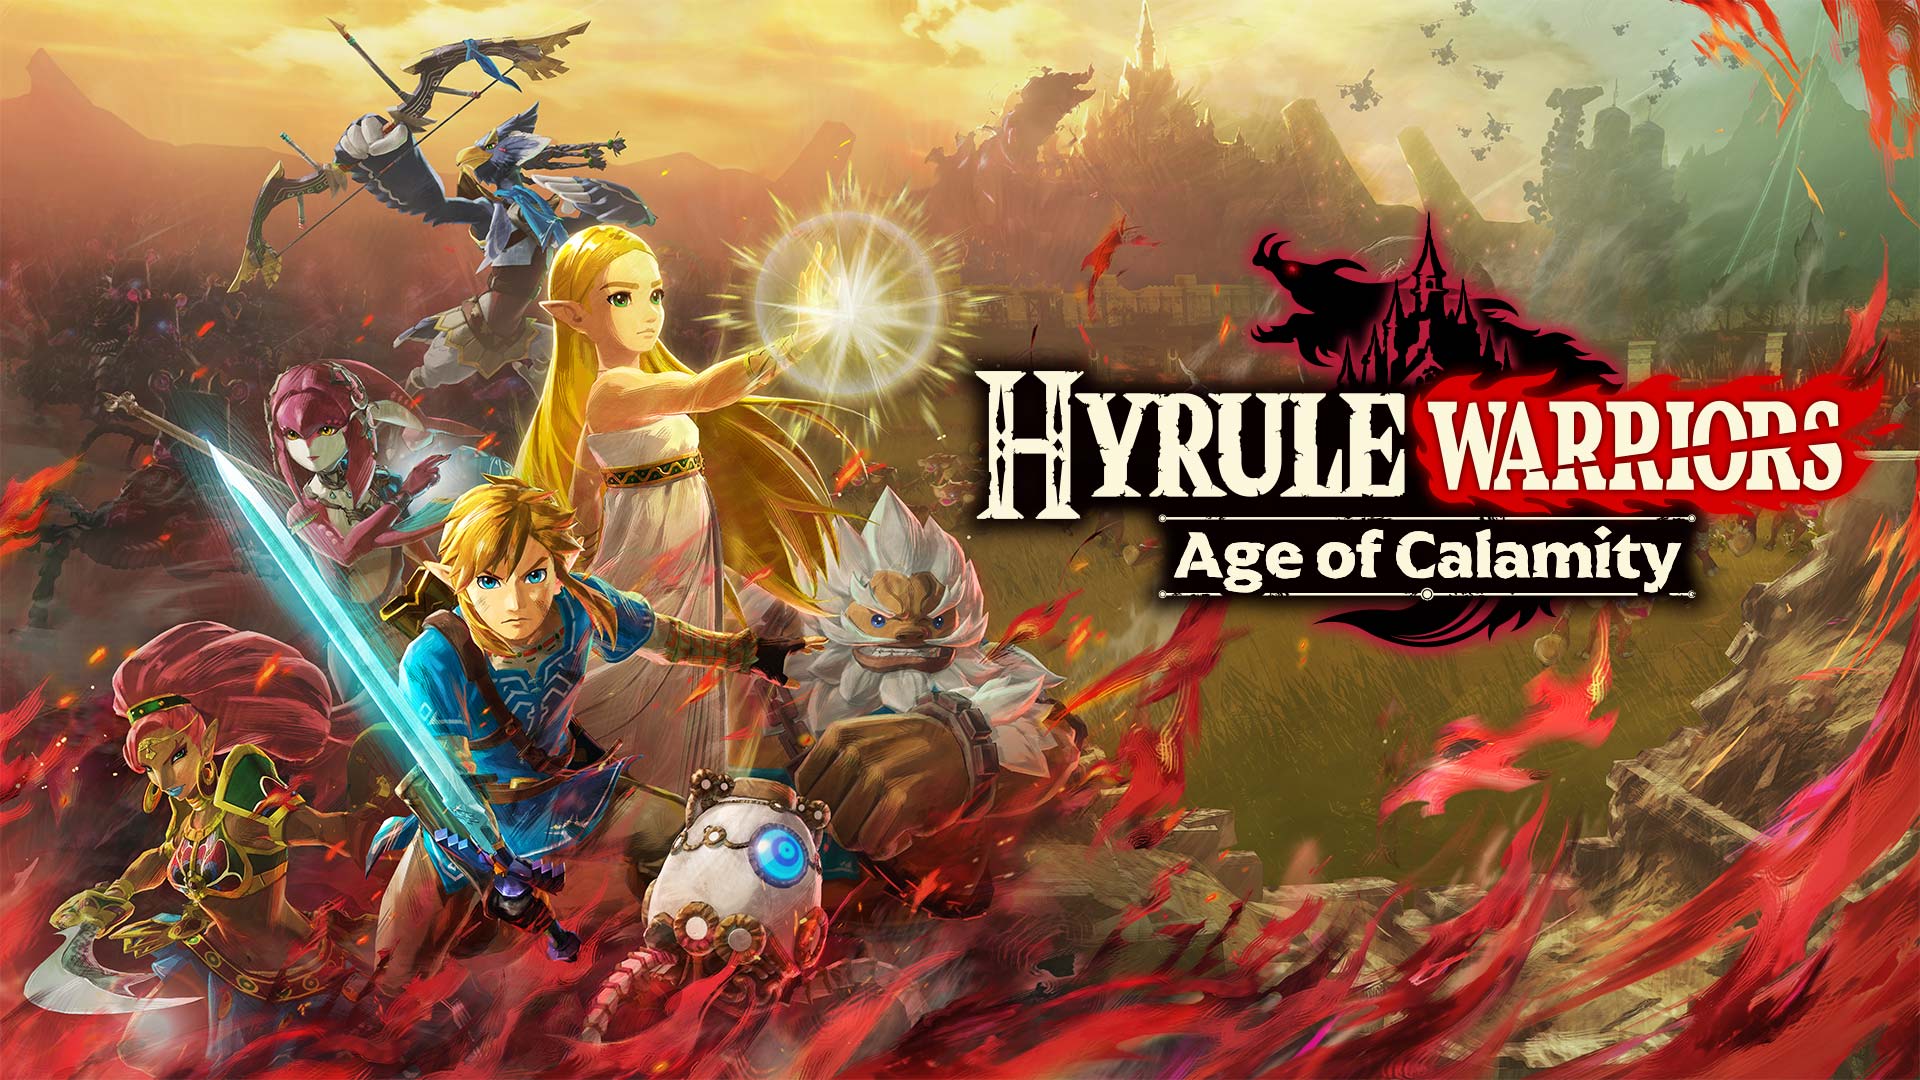 The Legend of Zelda: Breath of the Wild Prequel Hyrule Warriors: Age of Calamity Announced, Launches November 20 on Switch